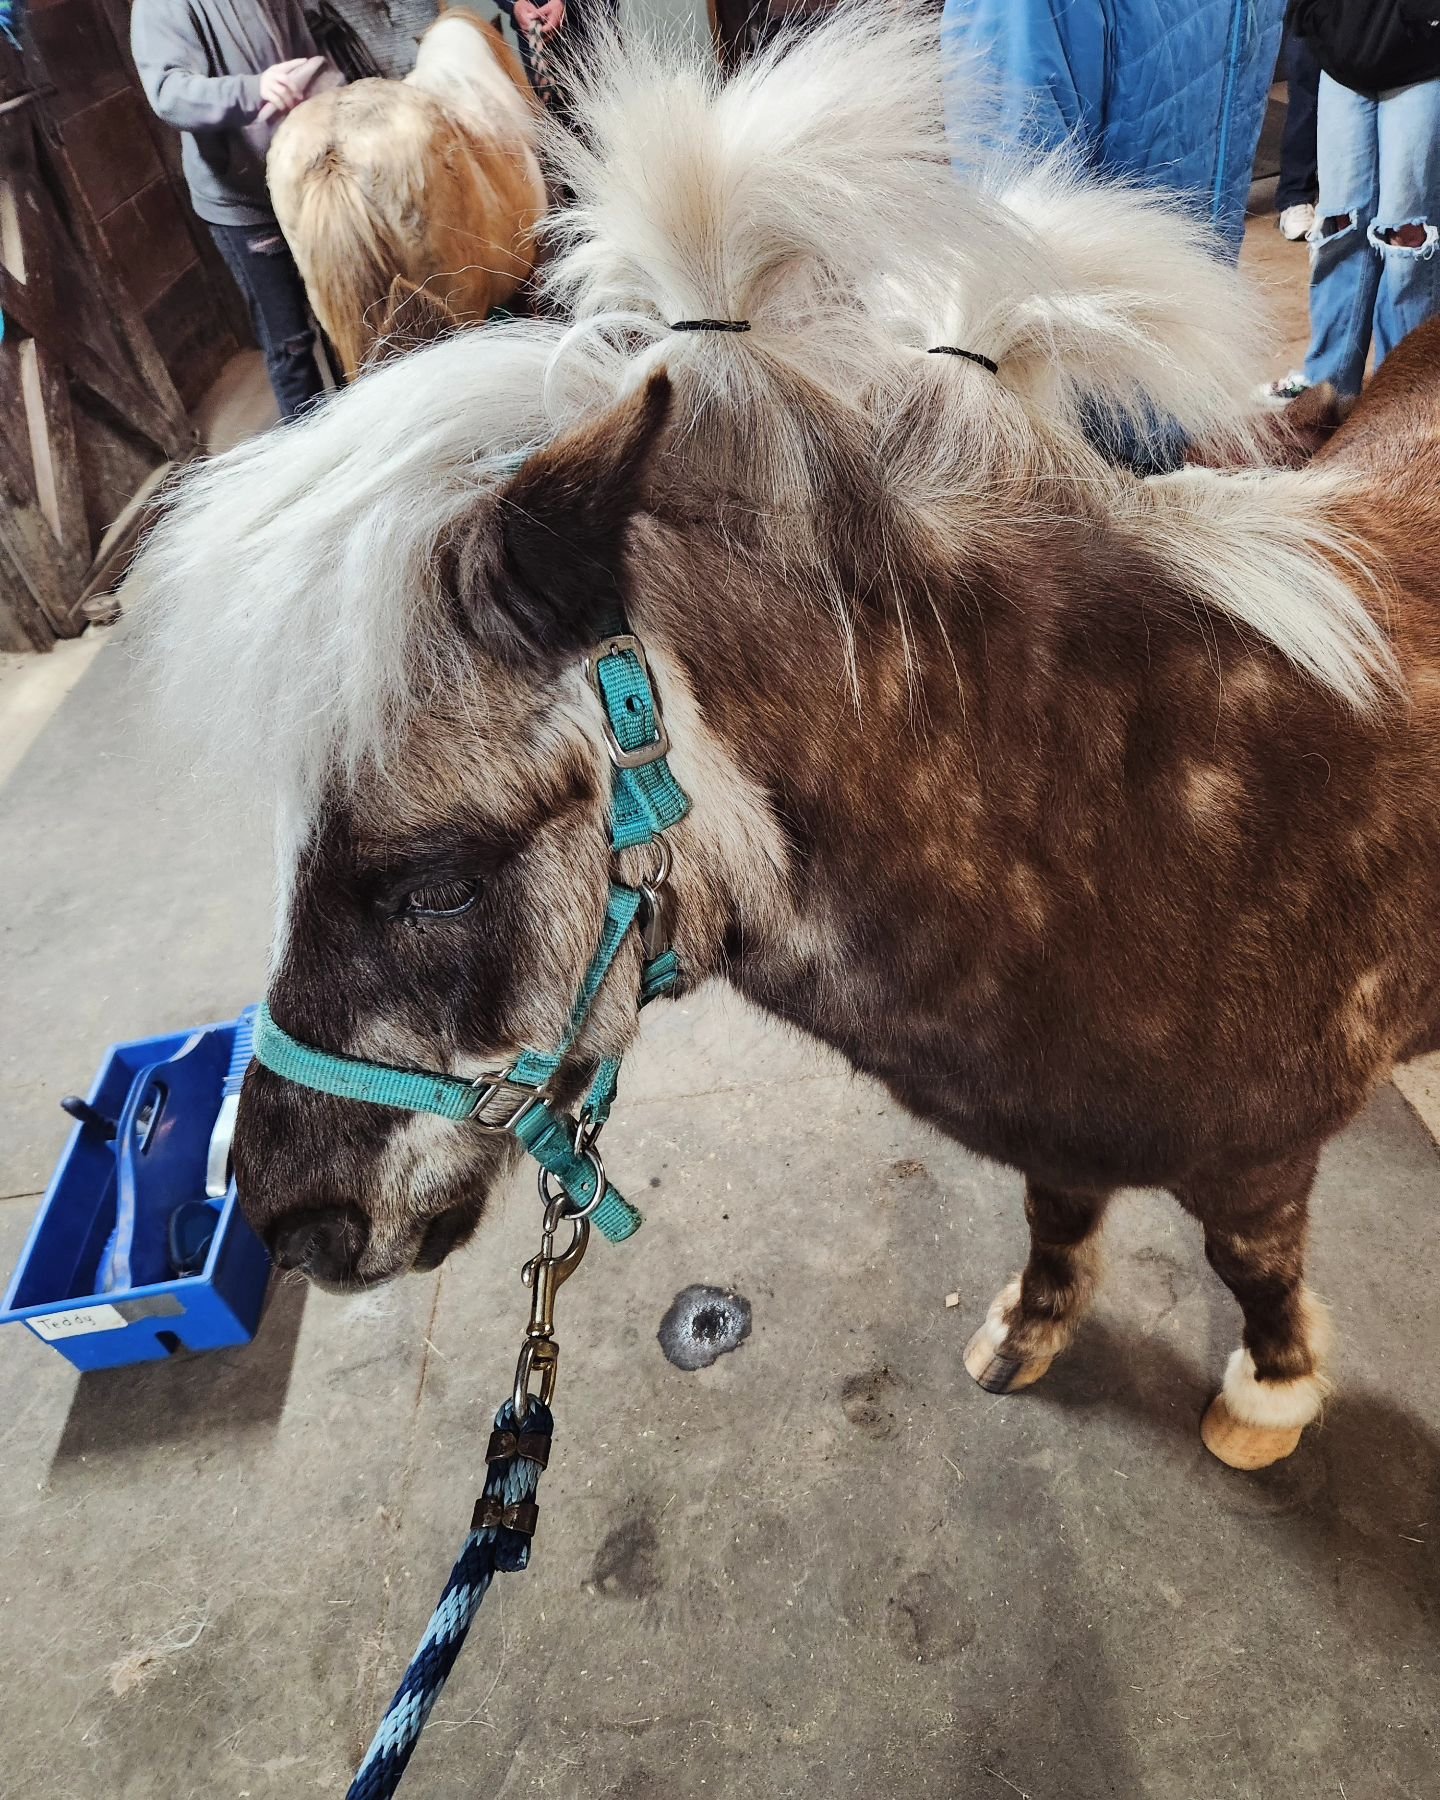 Dapper or Ridiculous?? You decide! Cast your vote in the comments!

#horsehair #minihorse #hugahorse